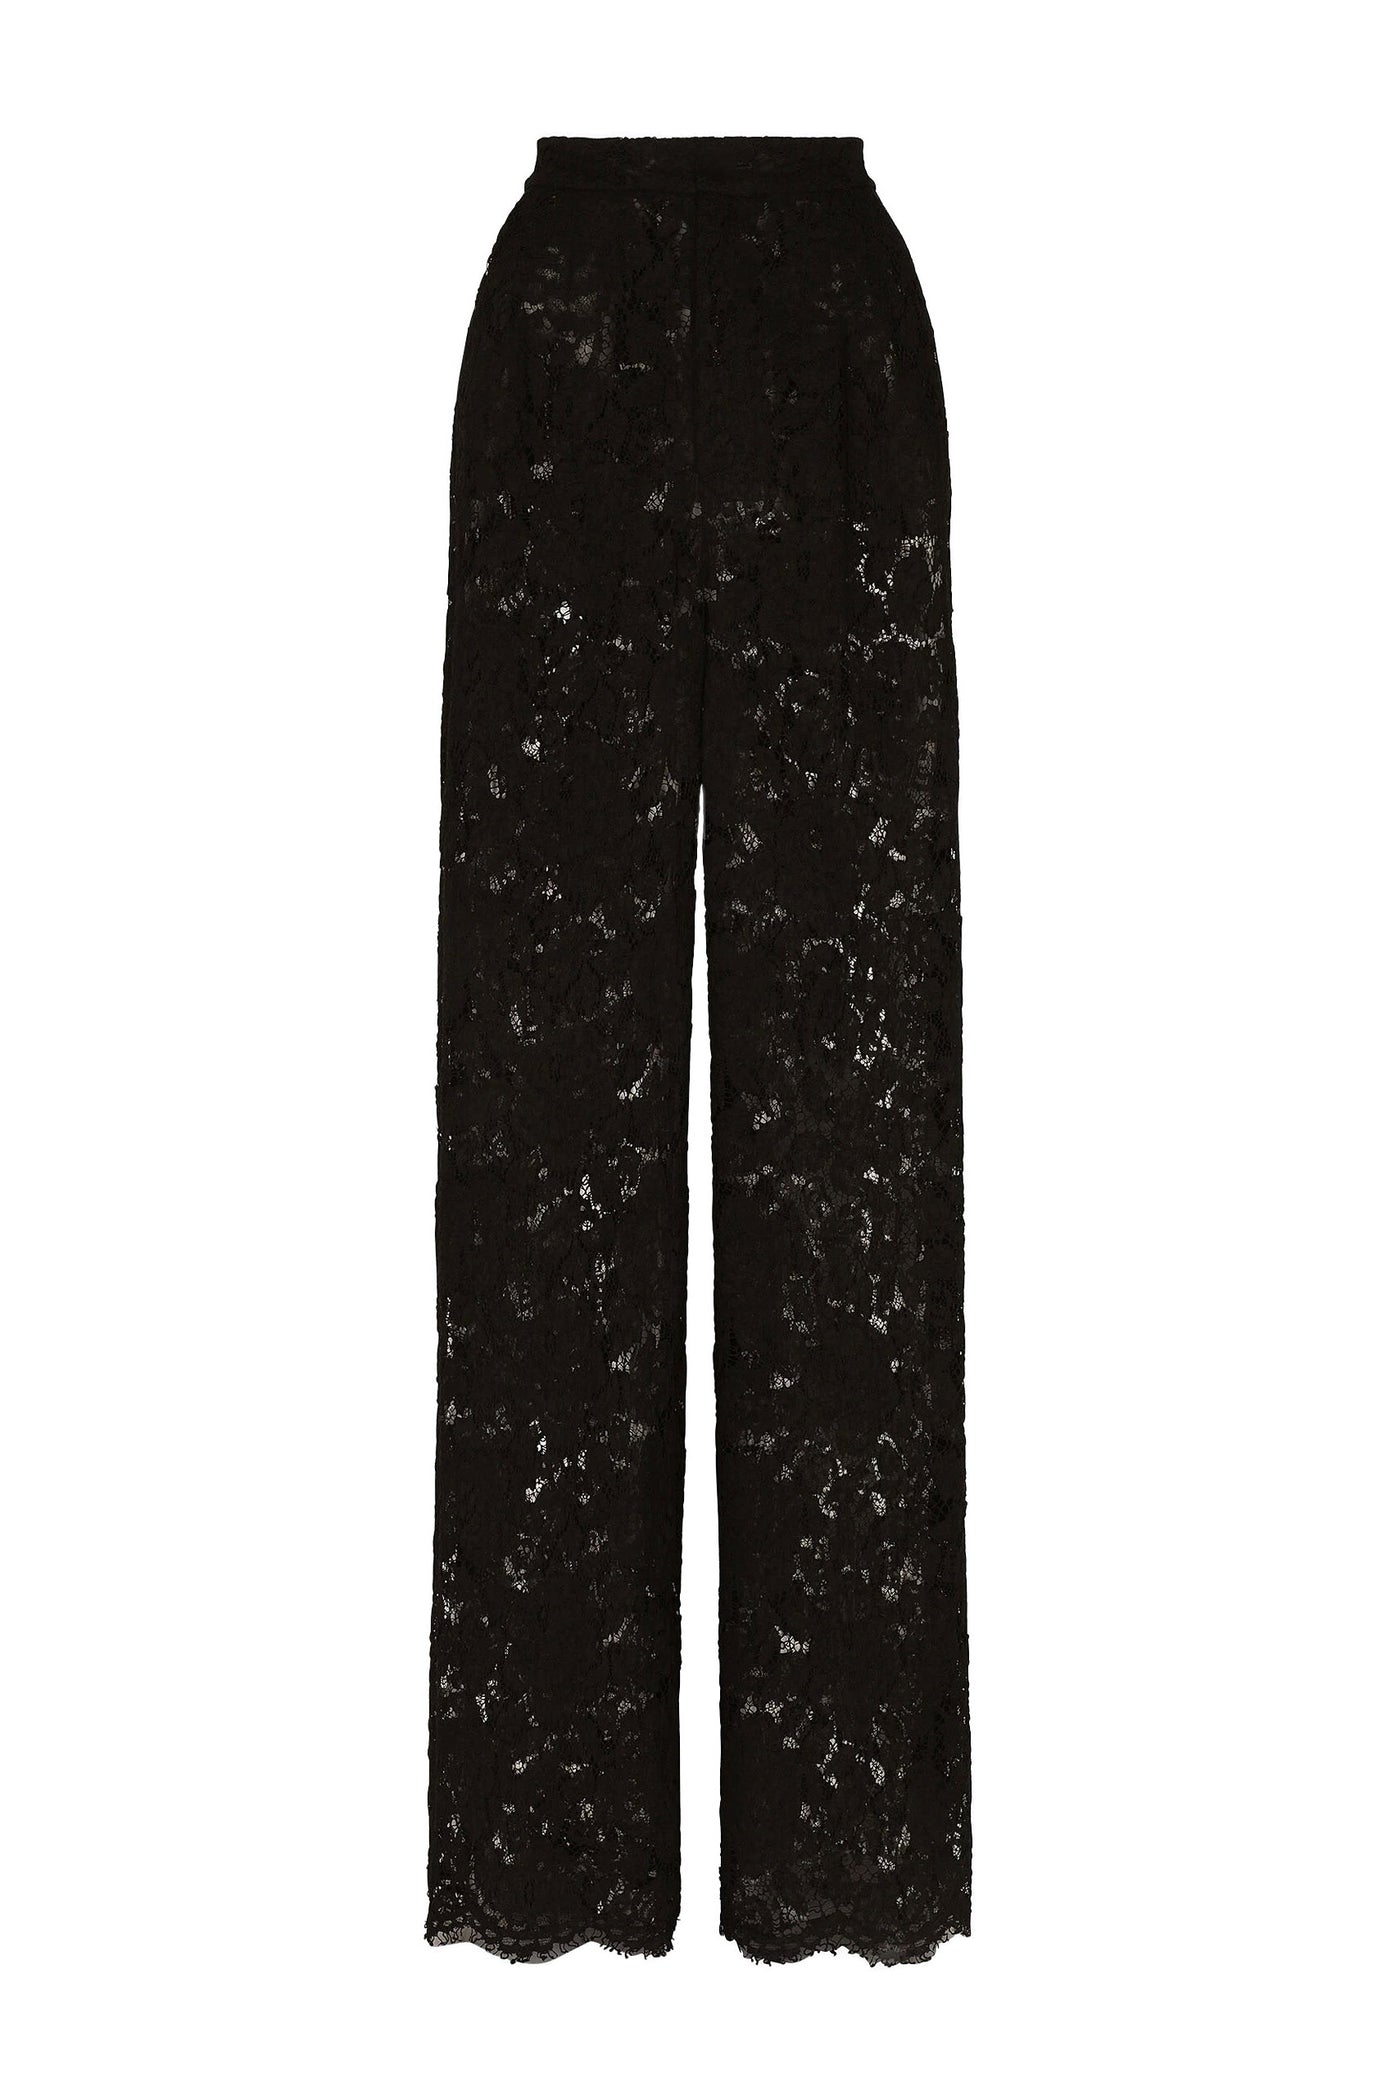 DOLCE&GABBANA FLARED BRANDED STRETCH LACE PANTS